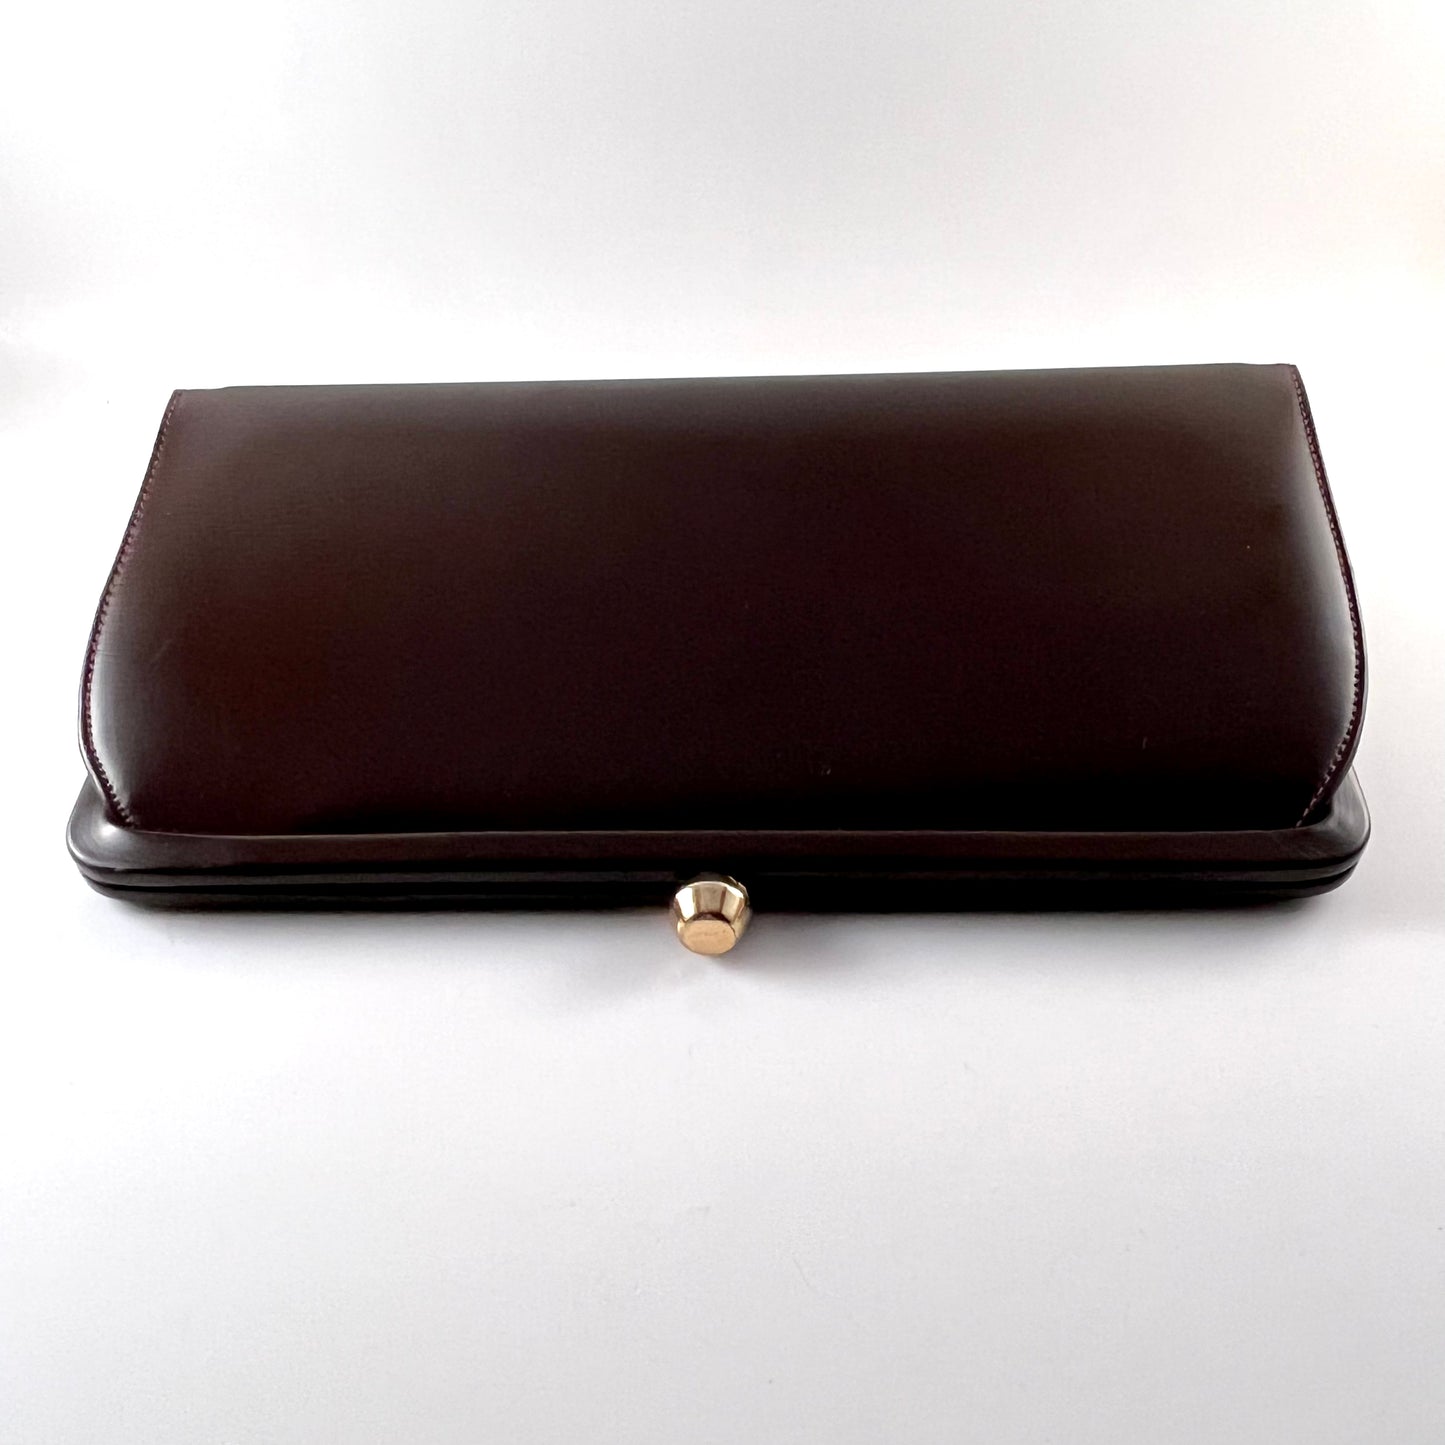 1960s Theodor California Clutch With Optional Handle